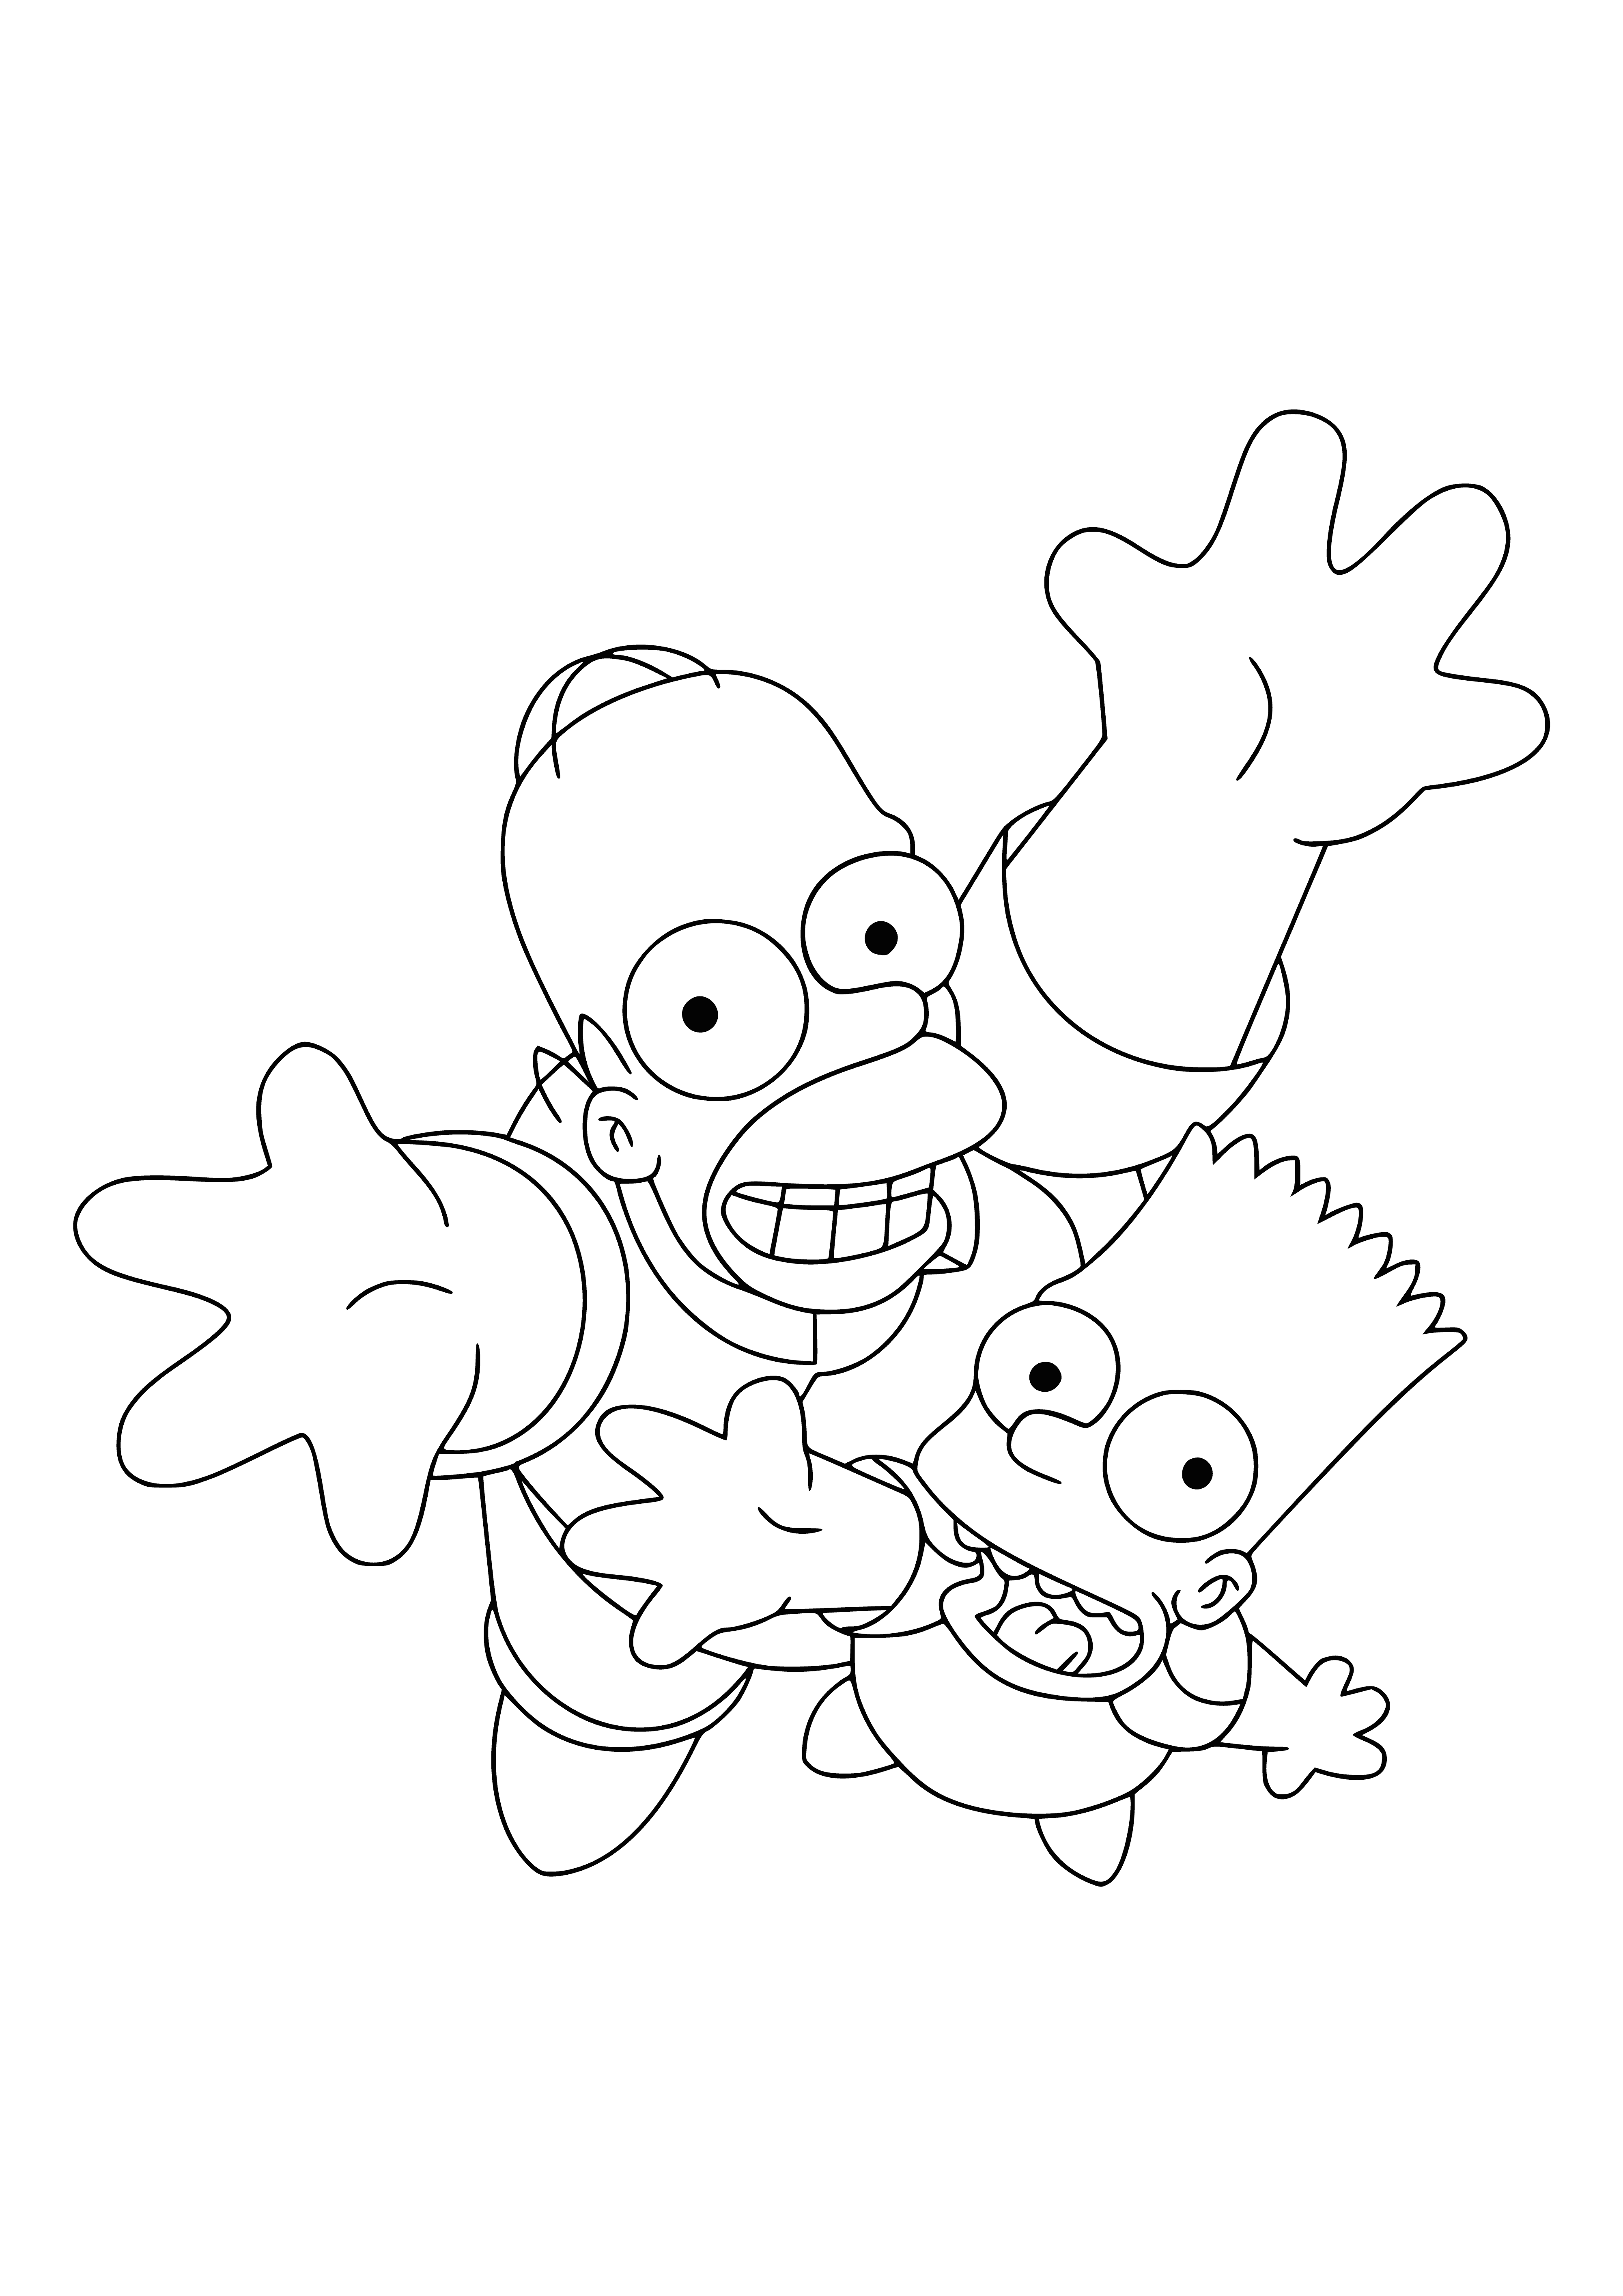 coloring page: Father & son Homer & Bart Simpson smile, Homer holds beer & Bart holds skateboard.